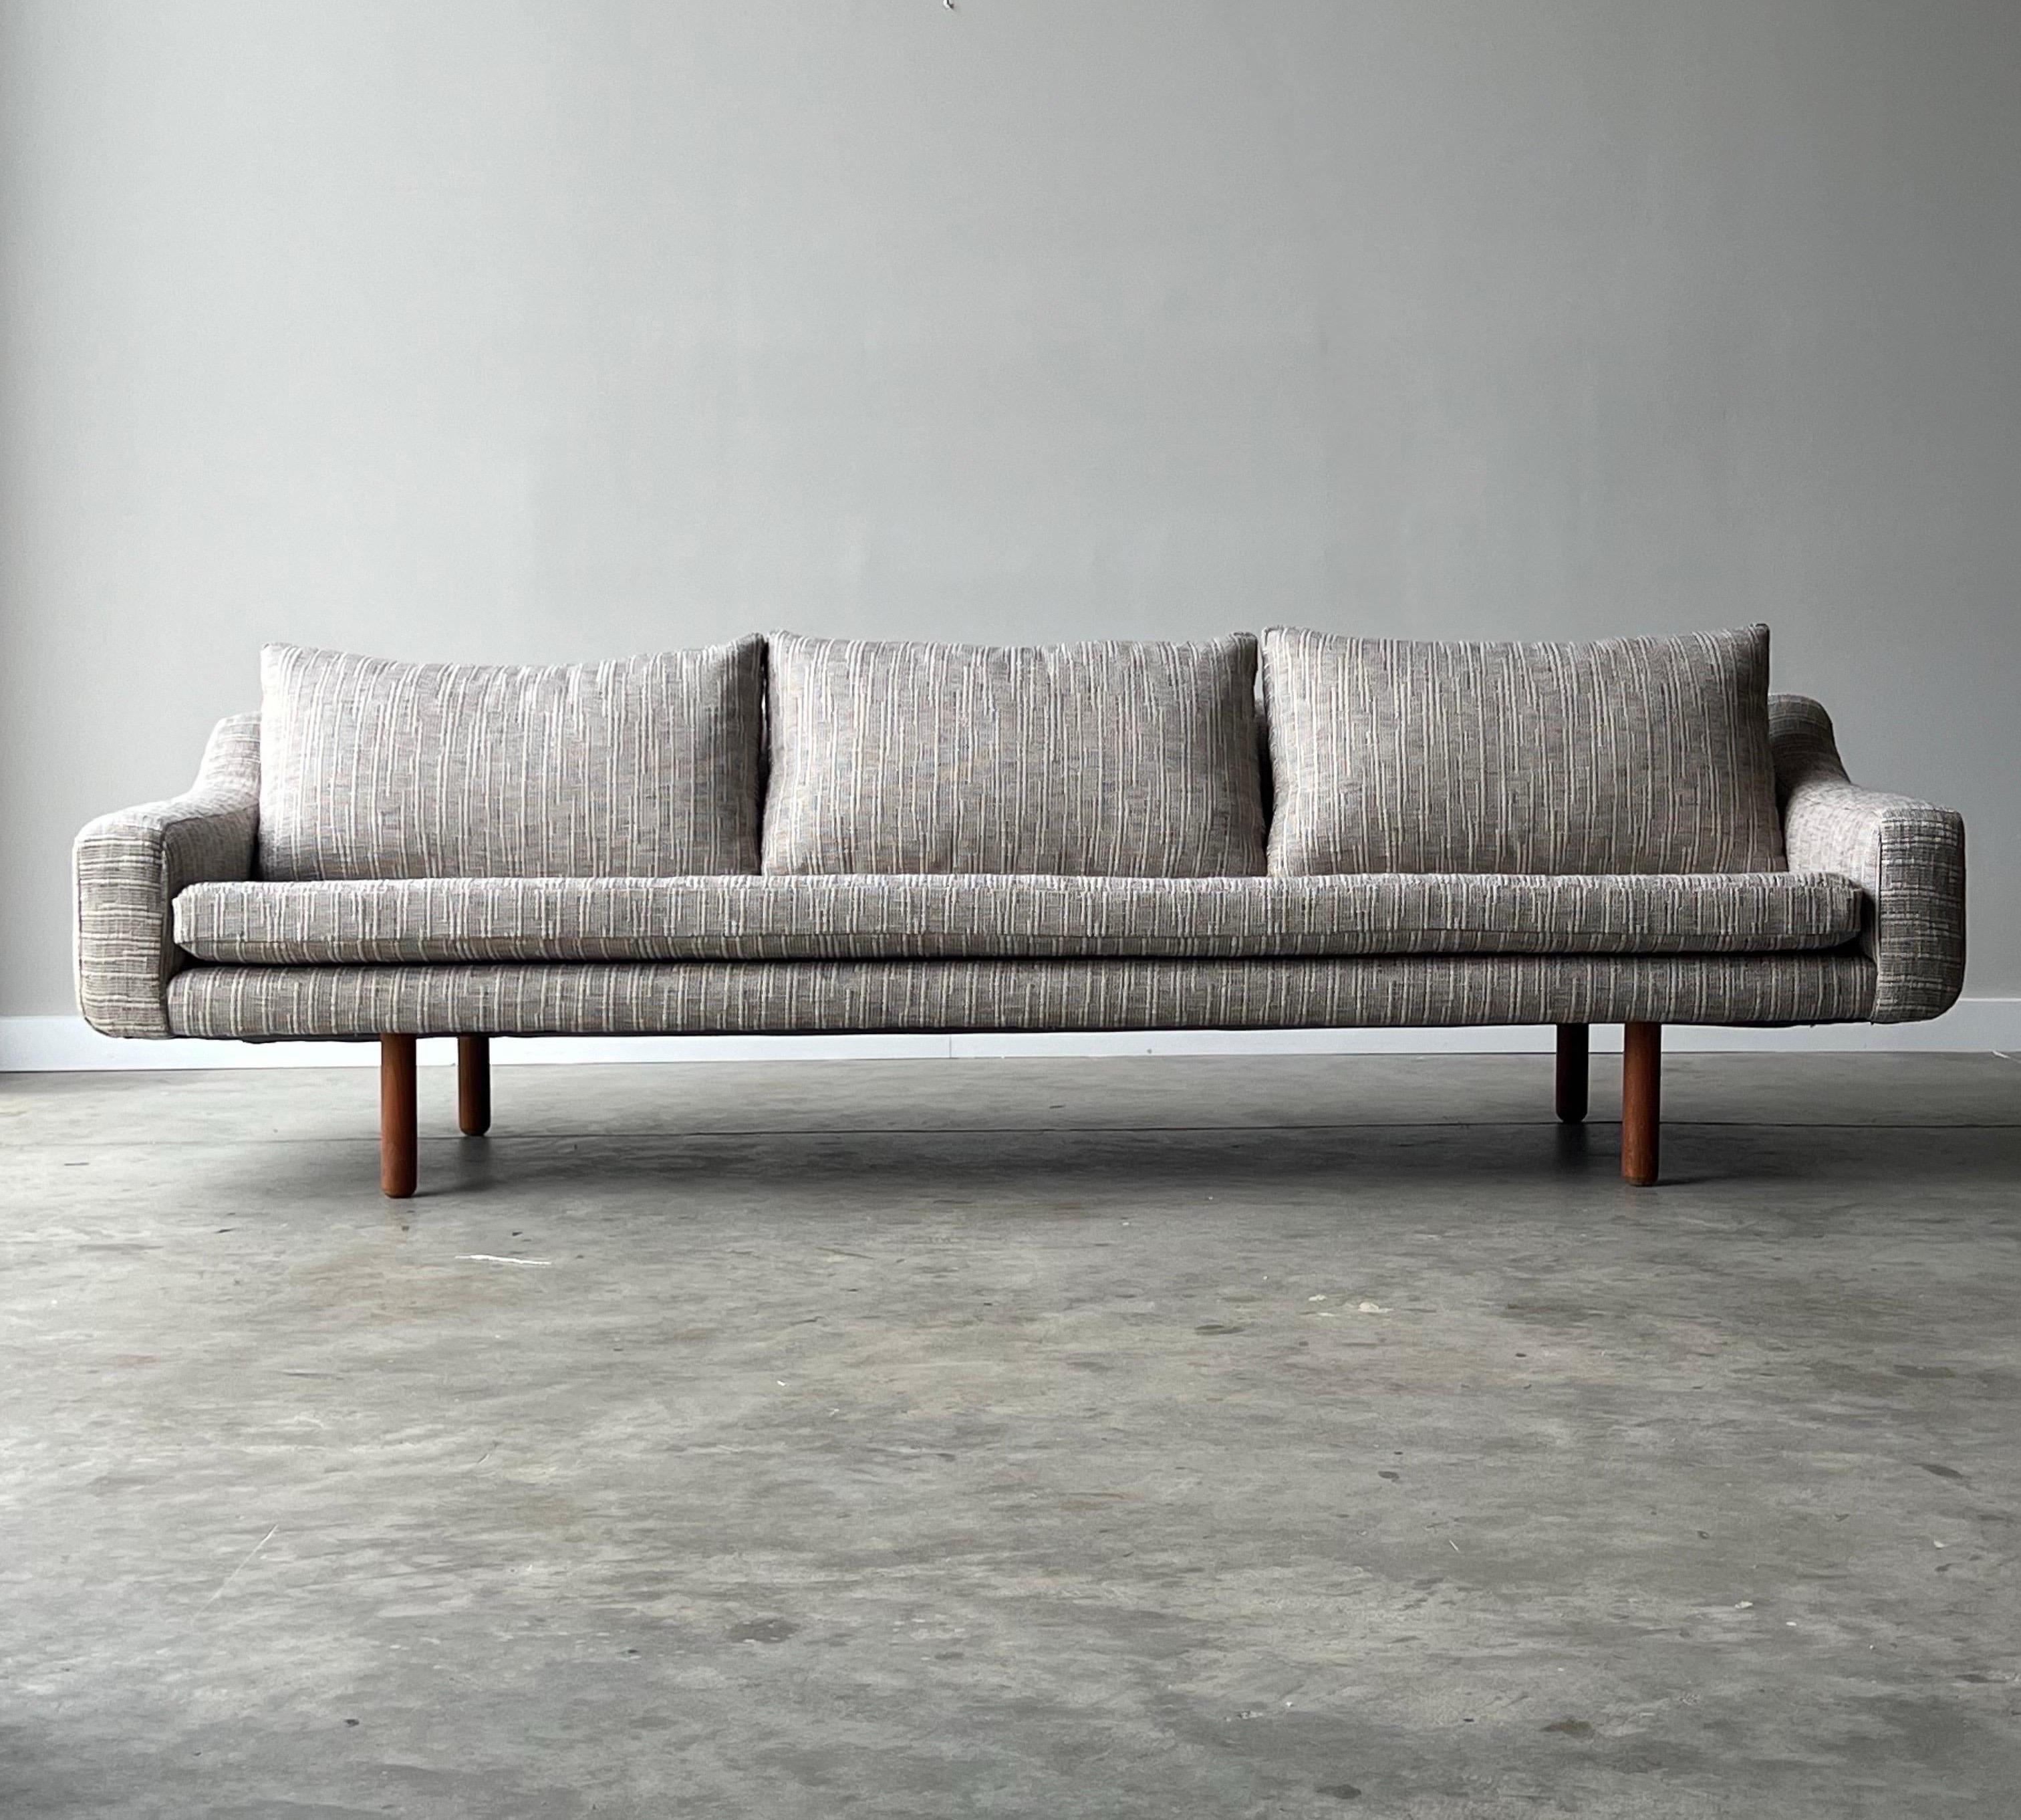 Mid-century sofa designed by LH HIELLE, Norway. This sofa is unique in design with a traditionally mid-century boxy front profile, yet has subtle curves and soft lines along the armrests and back. The side profile is vaguely reminiscent of the